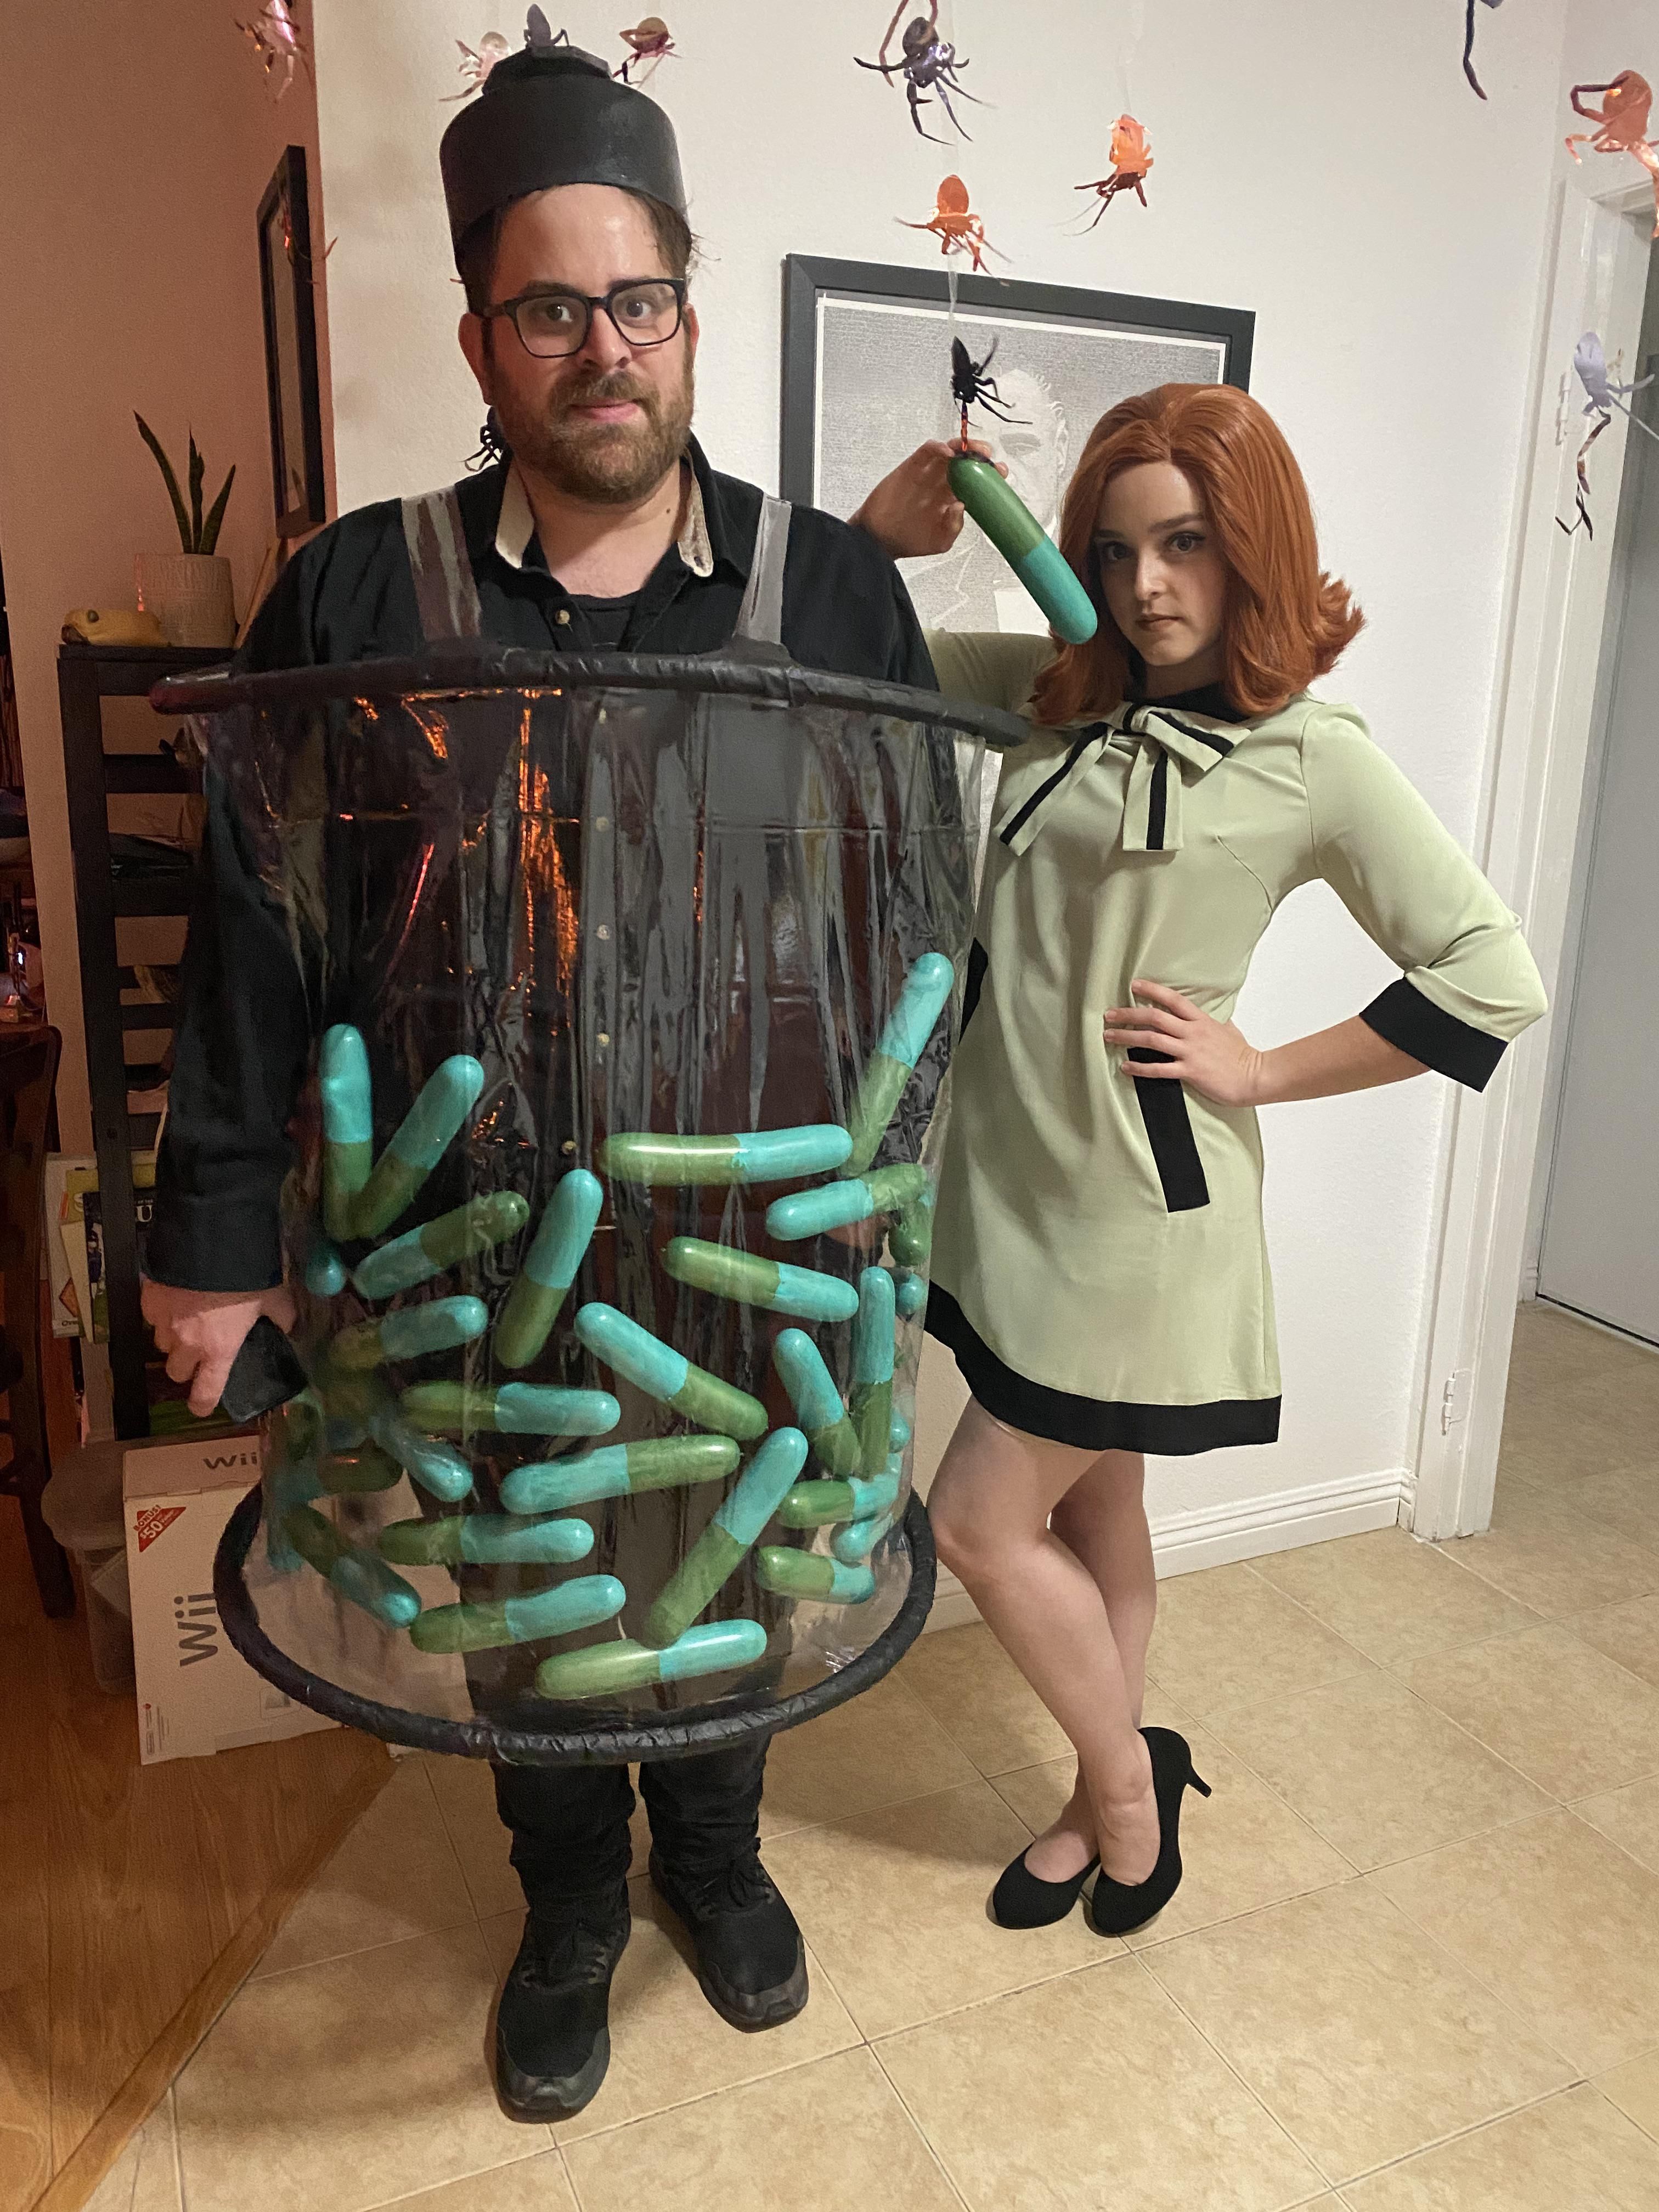 Girlfriend wanted to do a couples costume from Queen’s Gambit